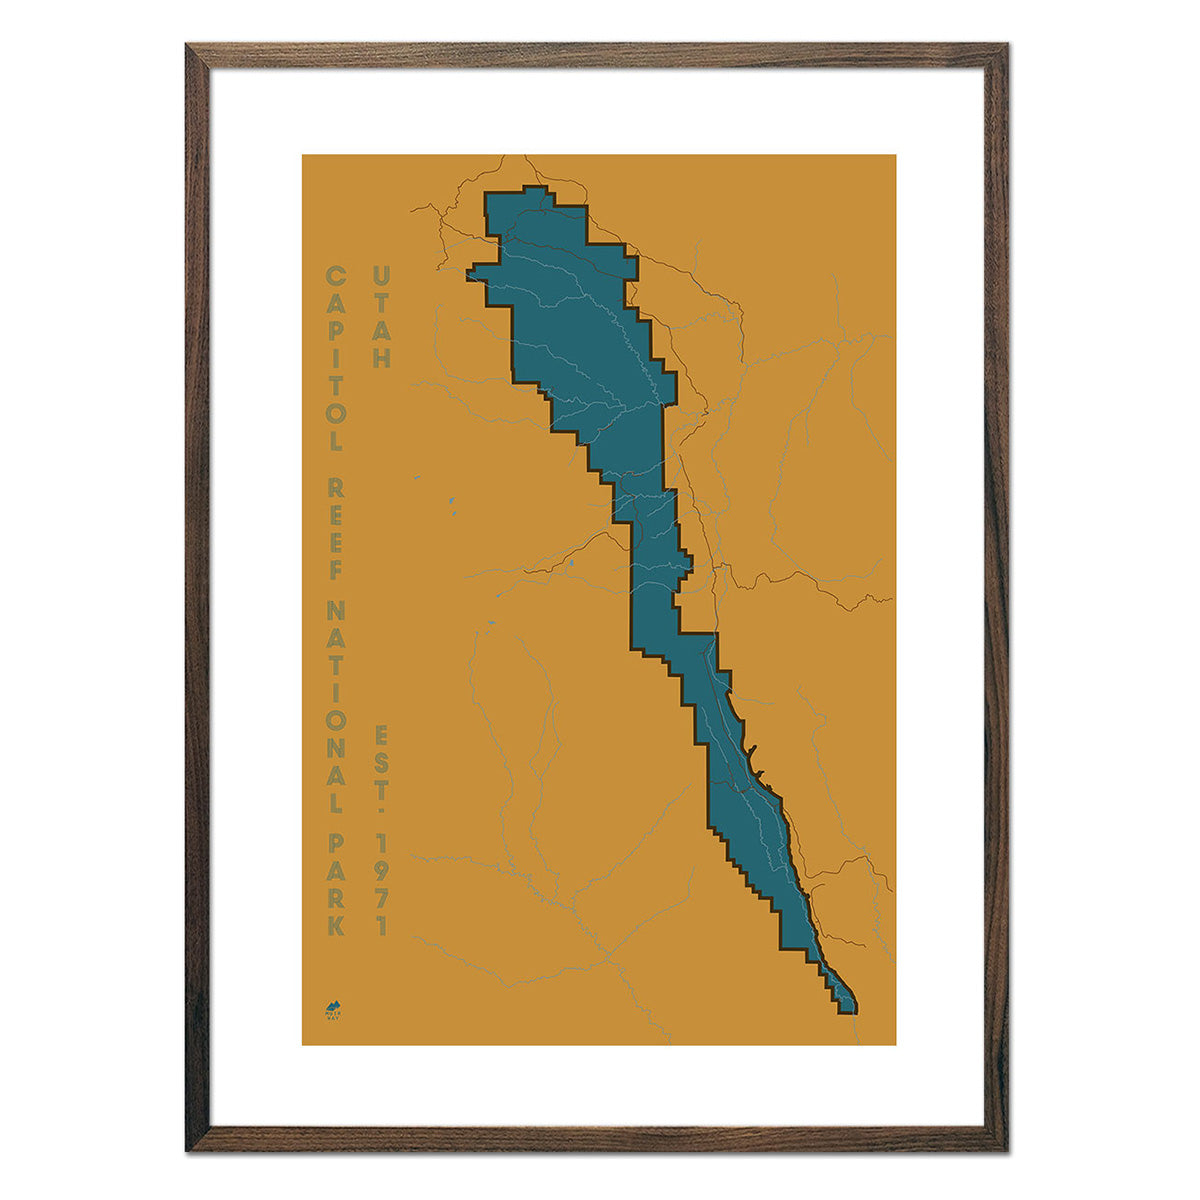 Capitol Reef National Park Map